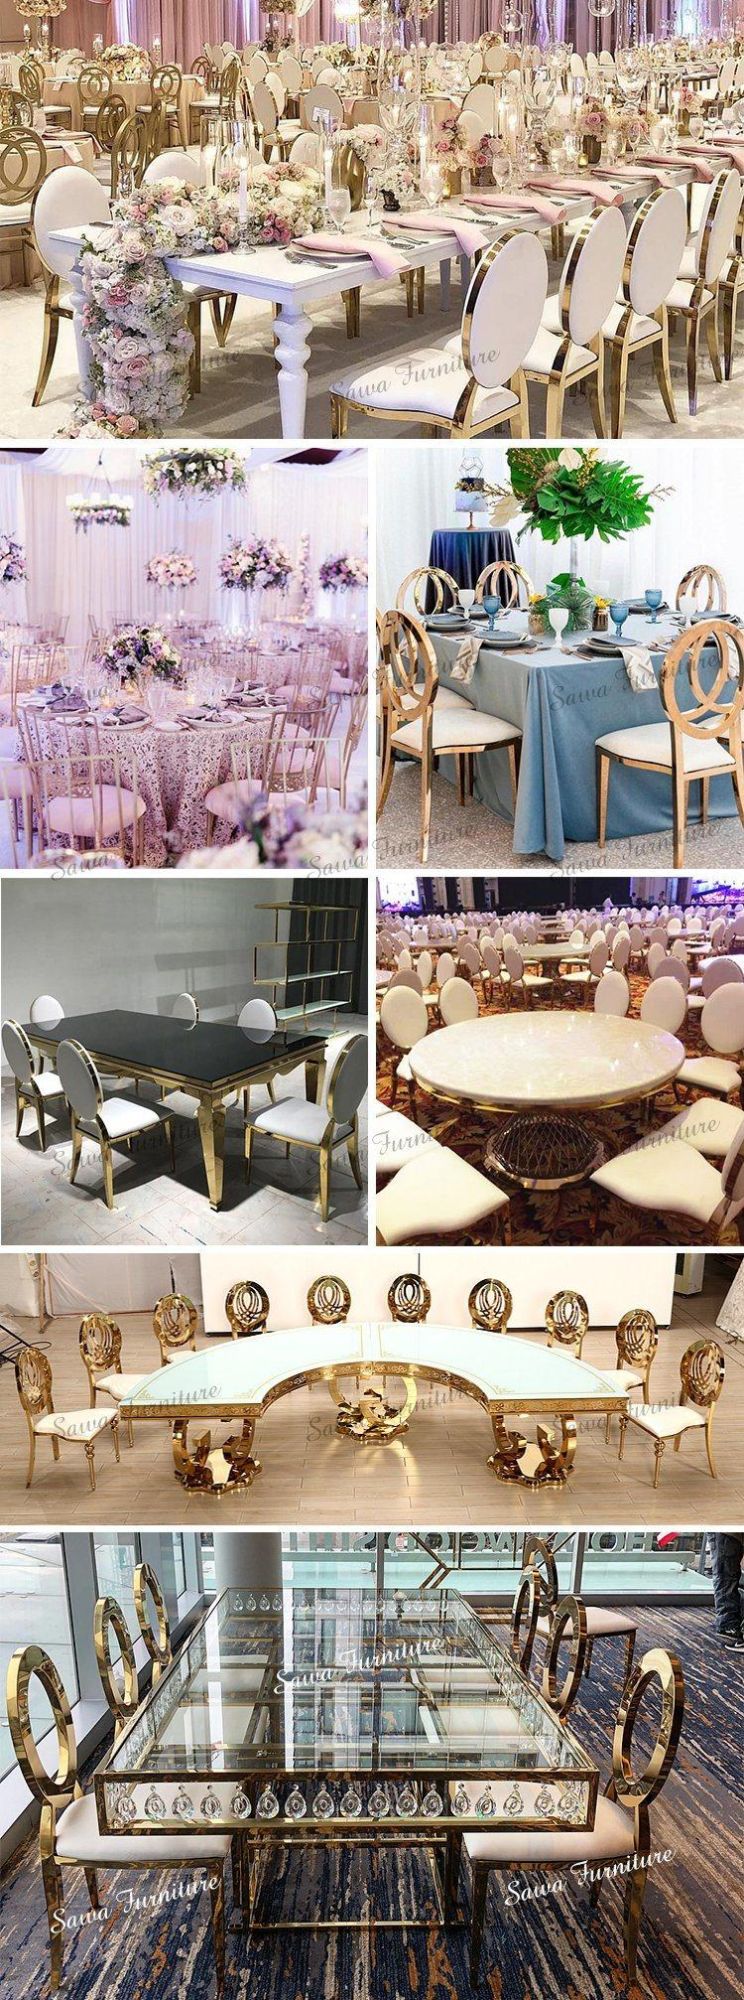 Elastic Flower Wedding Chair Cover Sashes Party Banquet Decoration